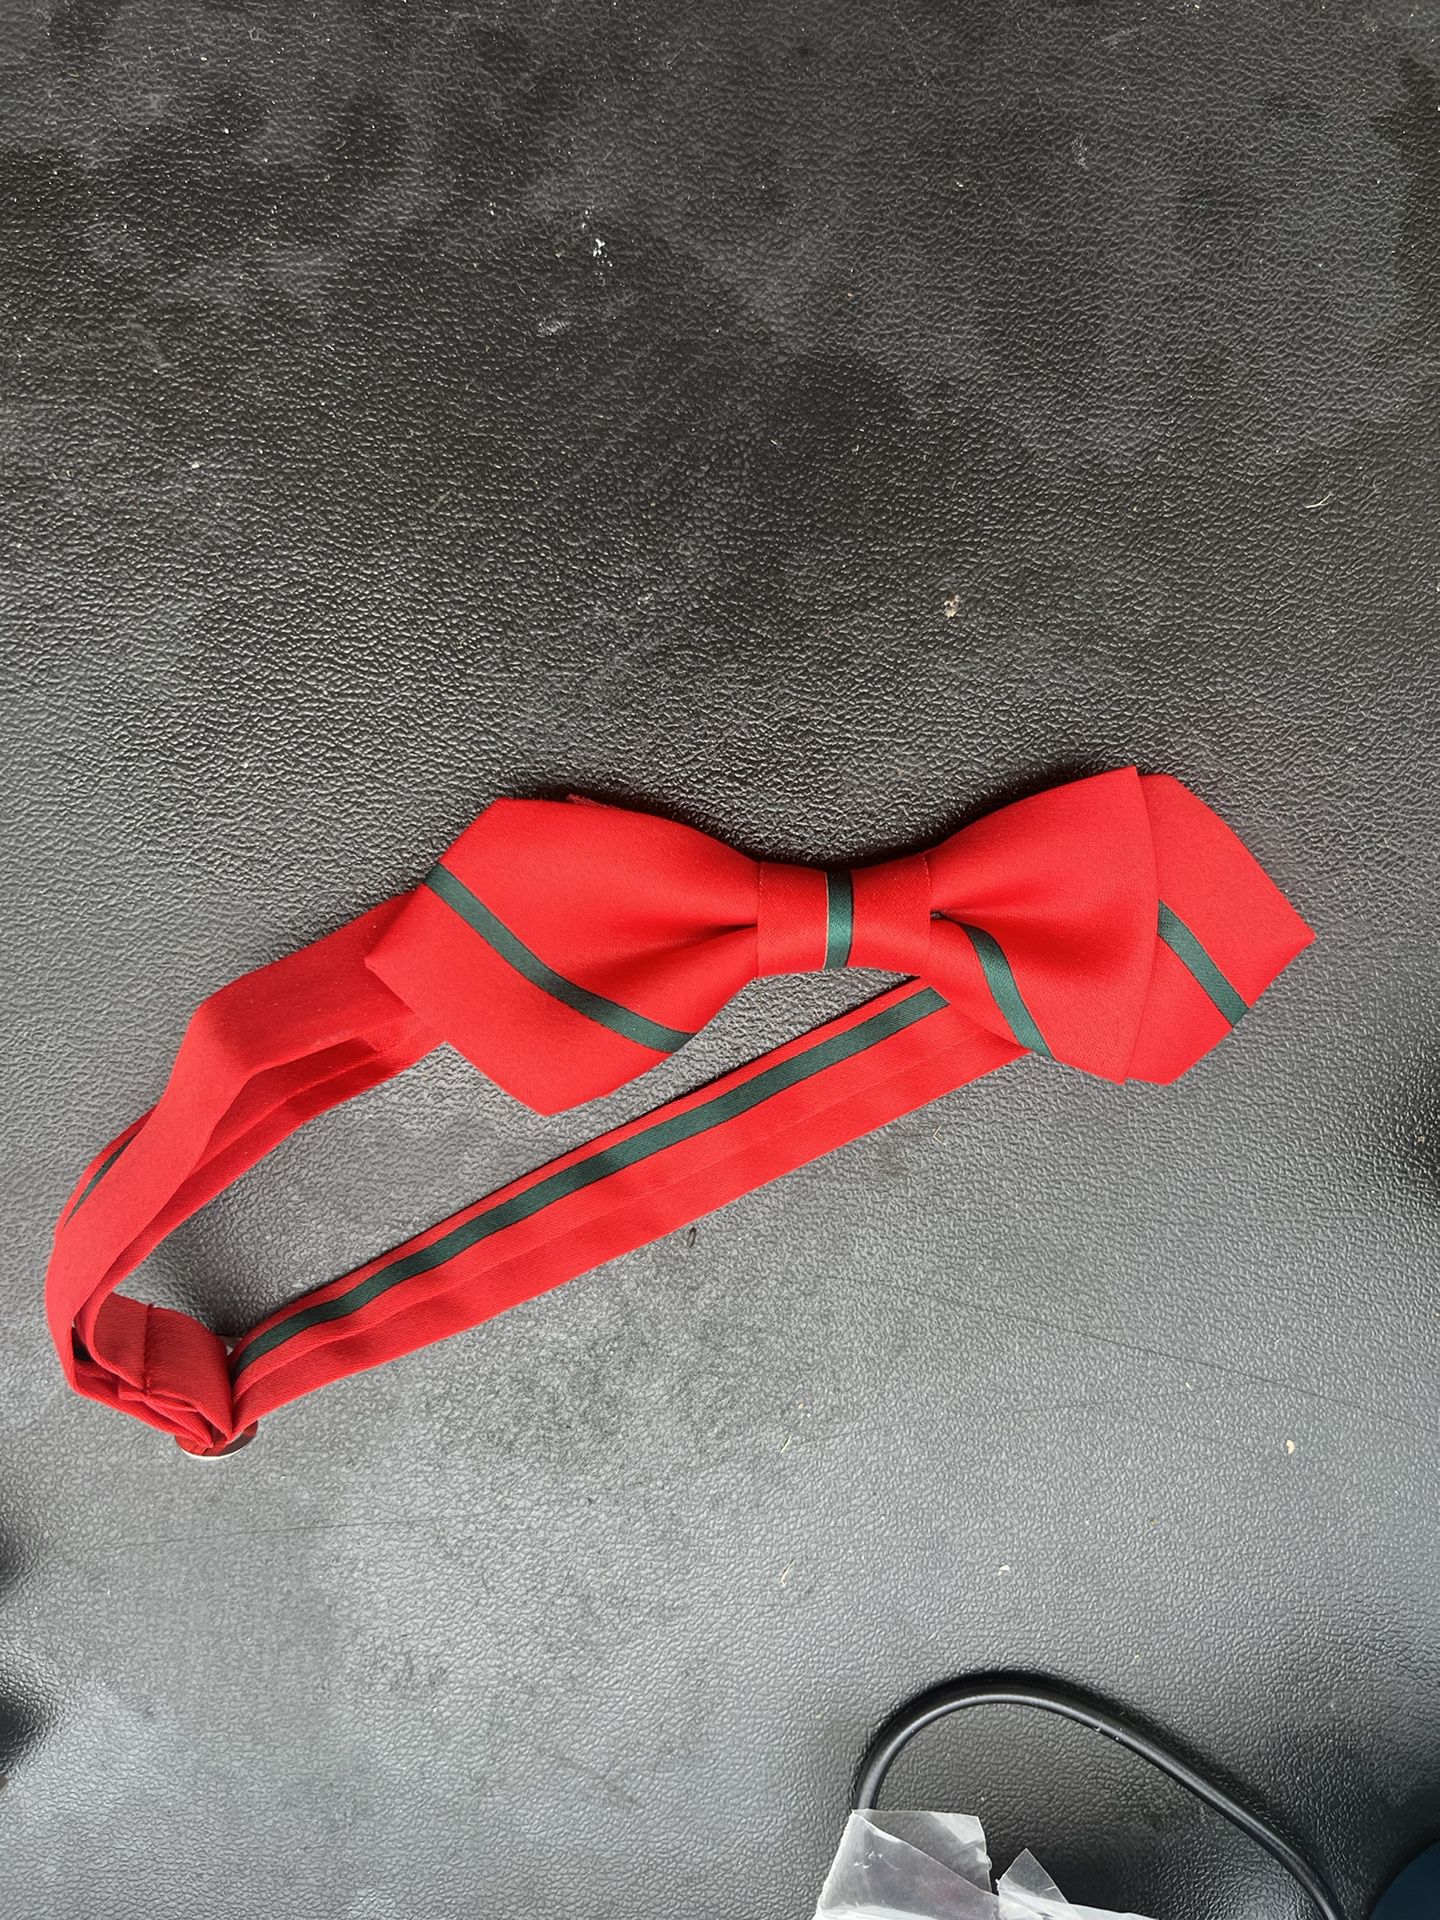 Red Clip Bow Tie